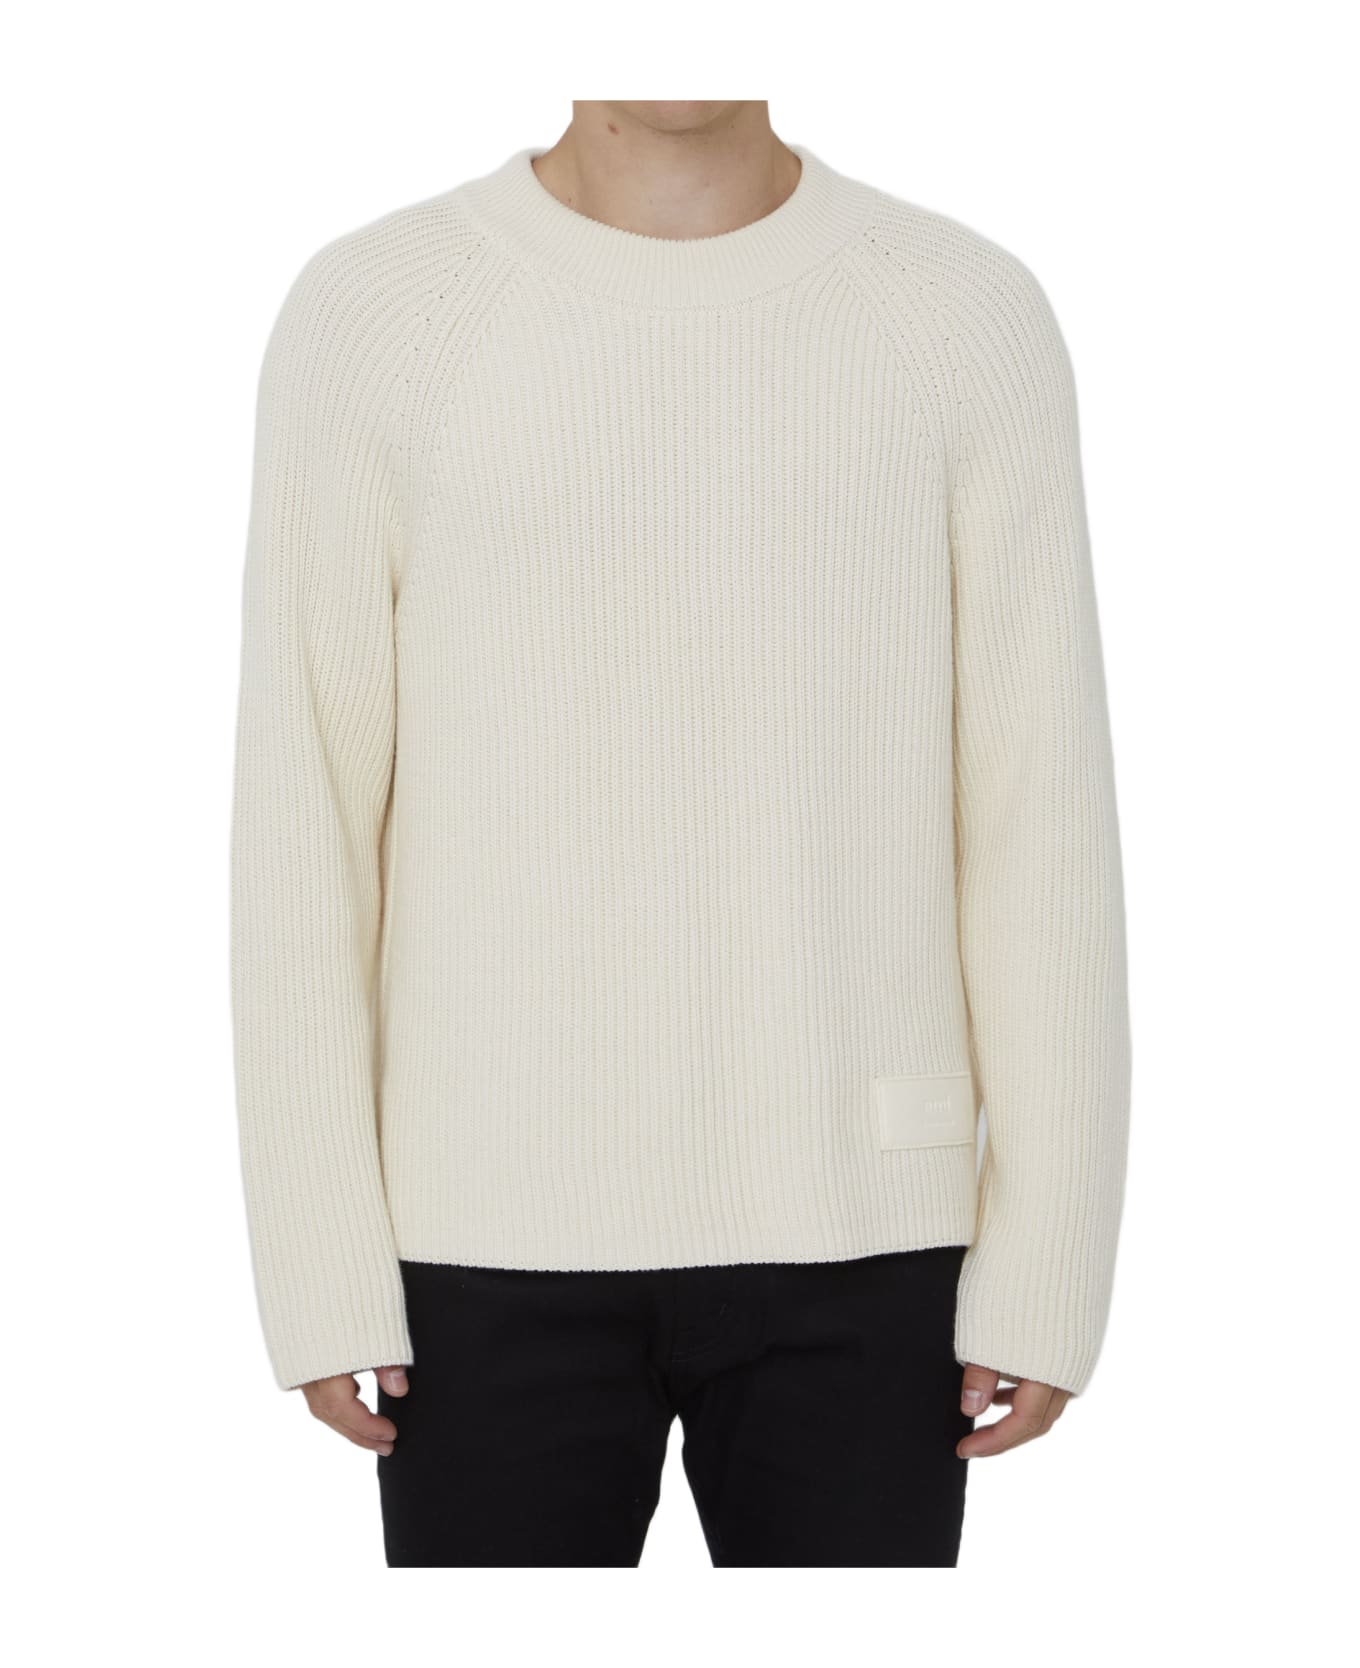 Ami Alexandre Mattiussi Ivory Jumper With Patch - IVORY